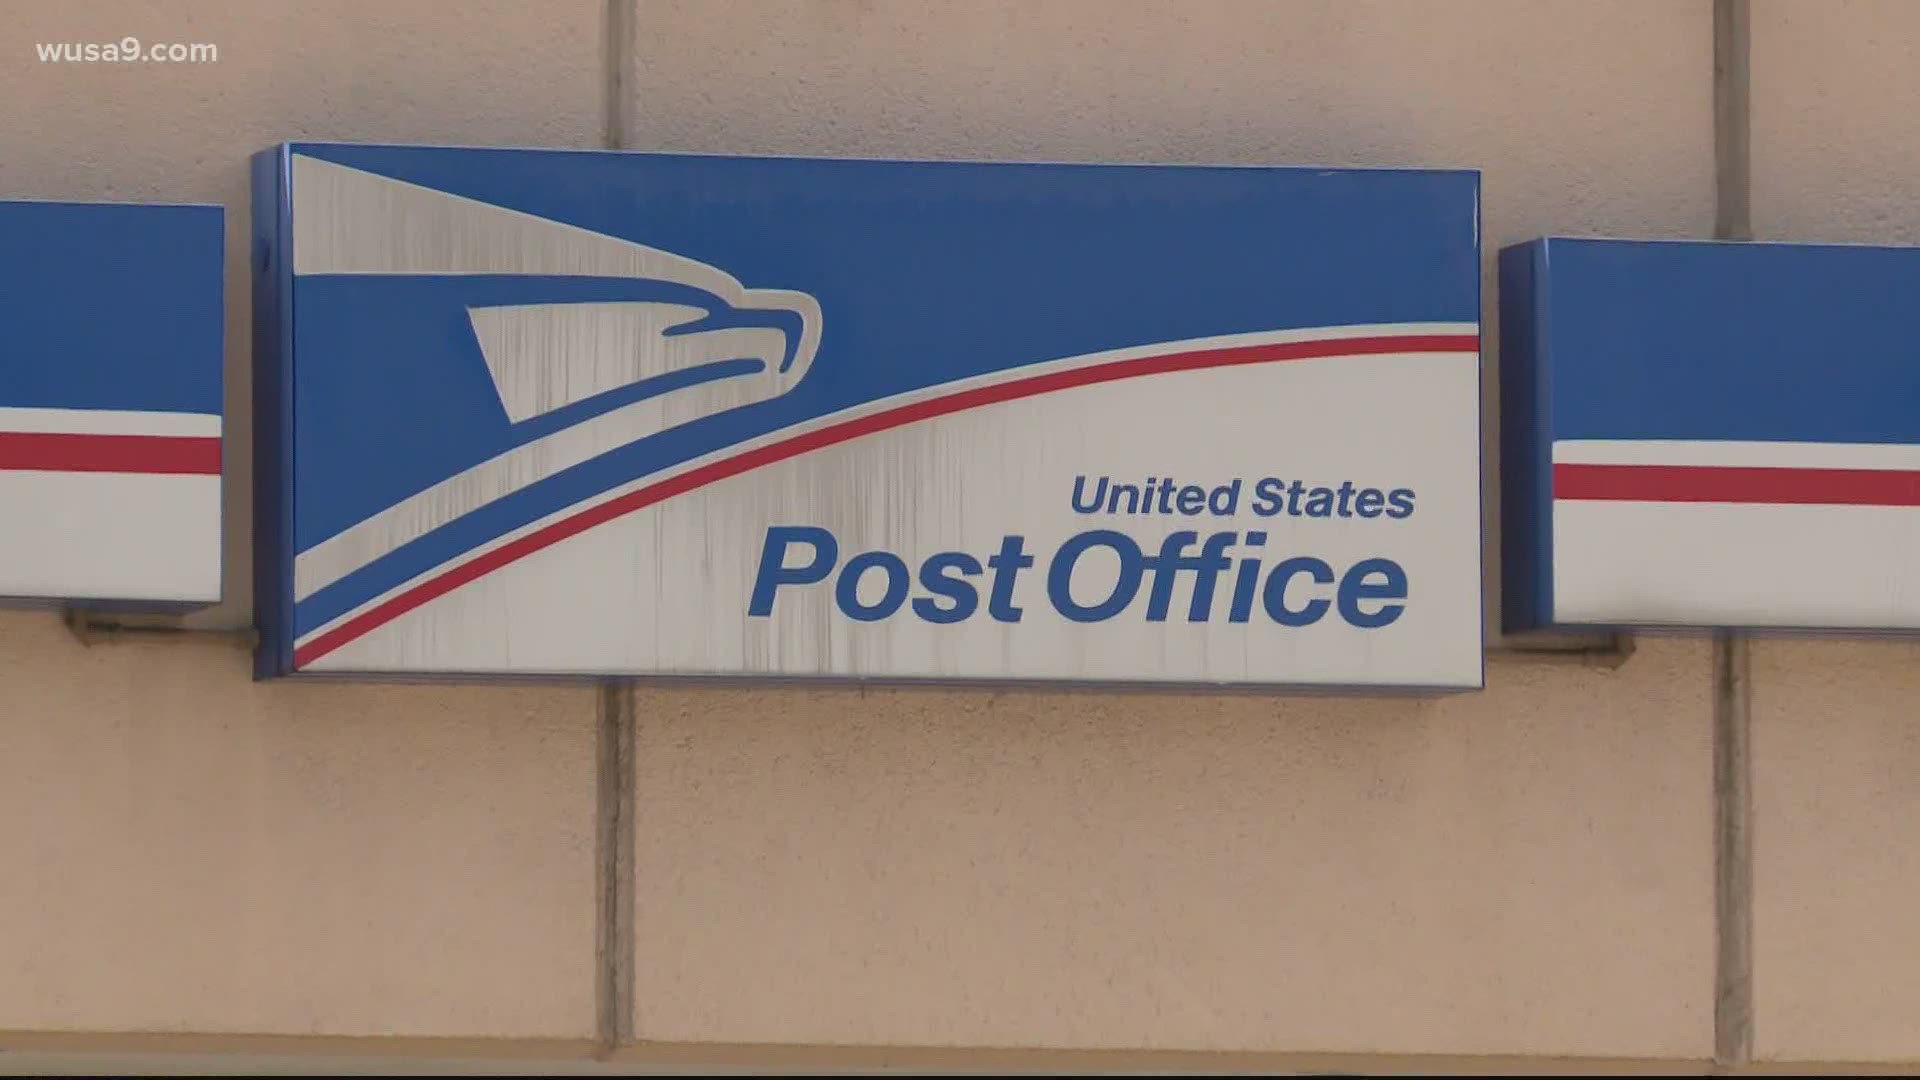 Maryland's congressional delegation is calling on Sen. Mitch McConnell to call the Senate back into session to immediately pass legislation to fund USPS.